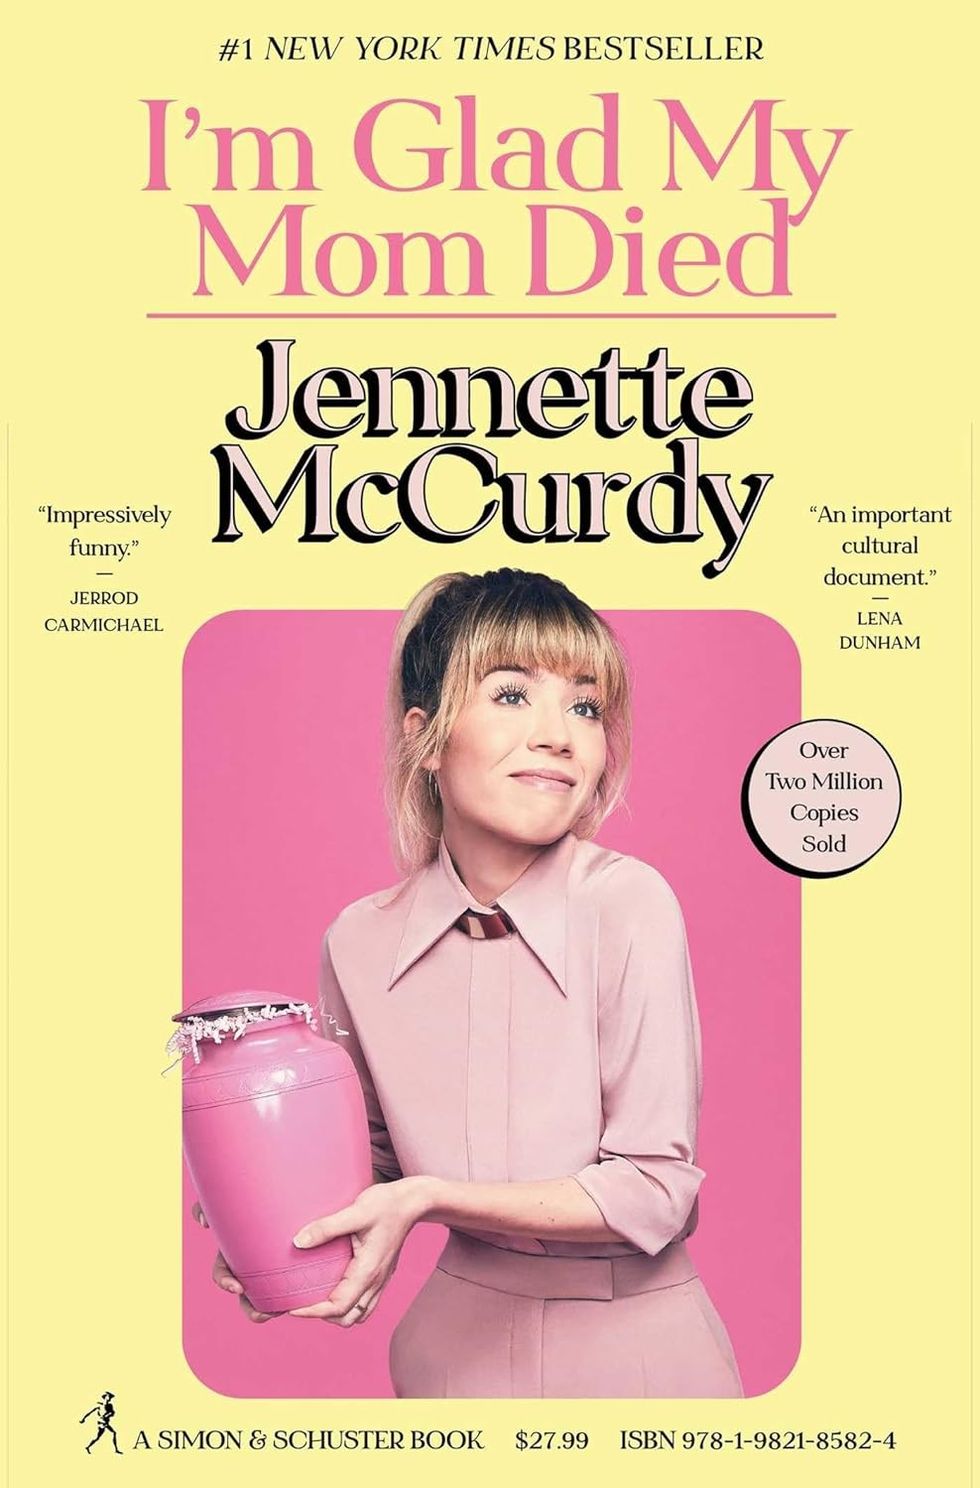 I'm Glad My Mom Died by Jeanette McCurdy